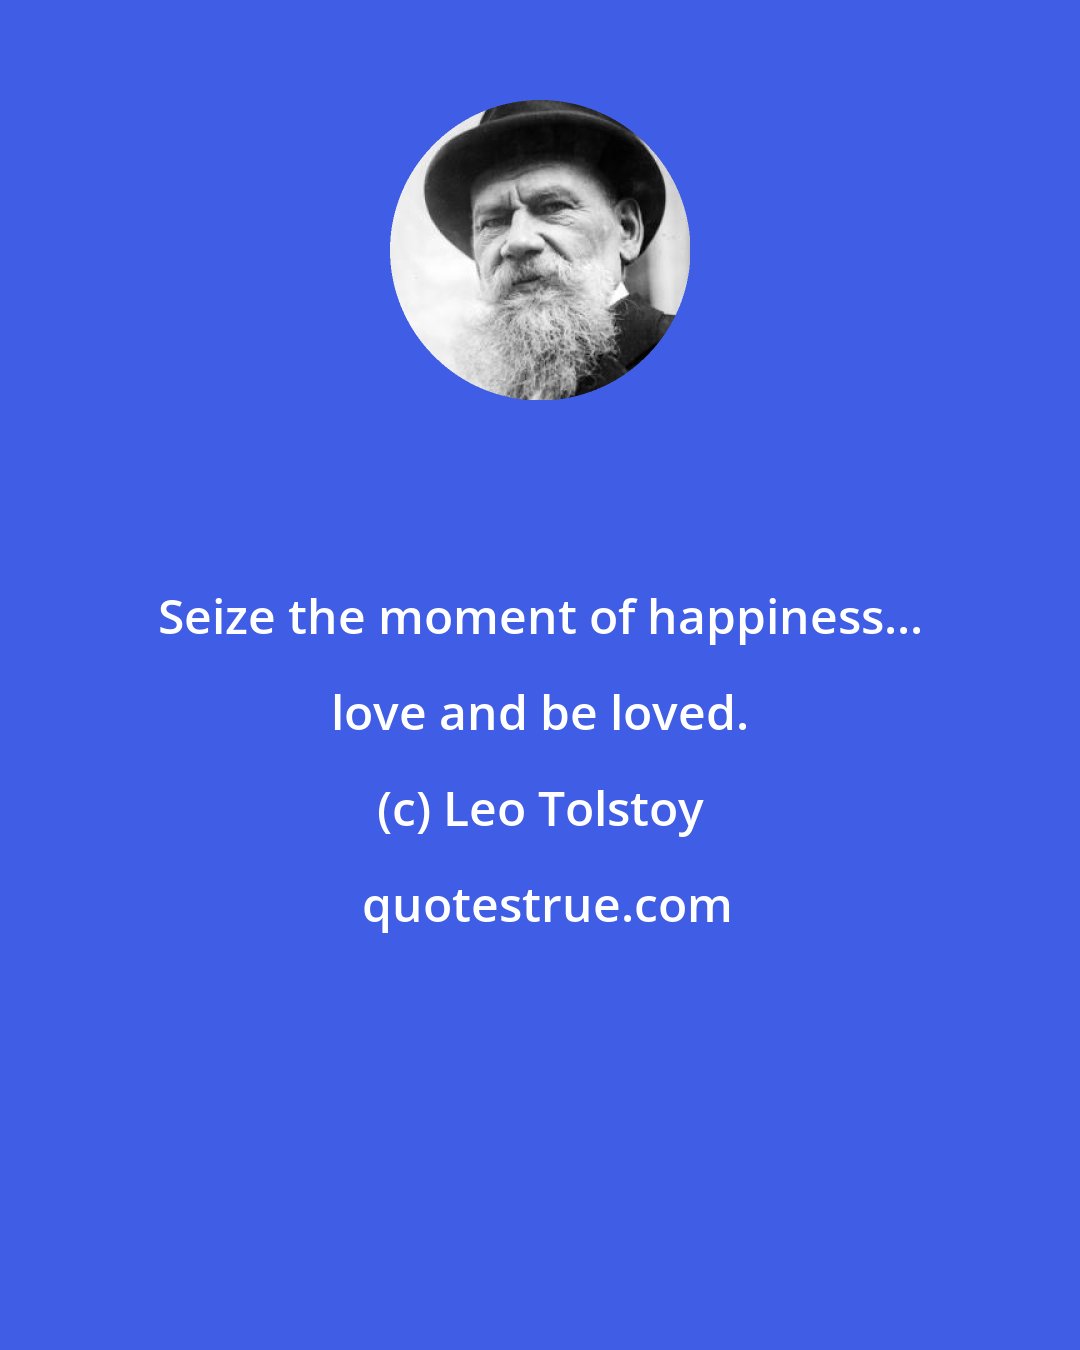 Leo Tolstoy: Seize the moment of happiness... love and be loved.